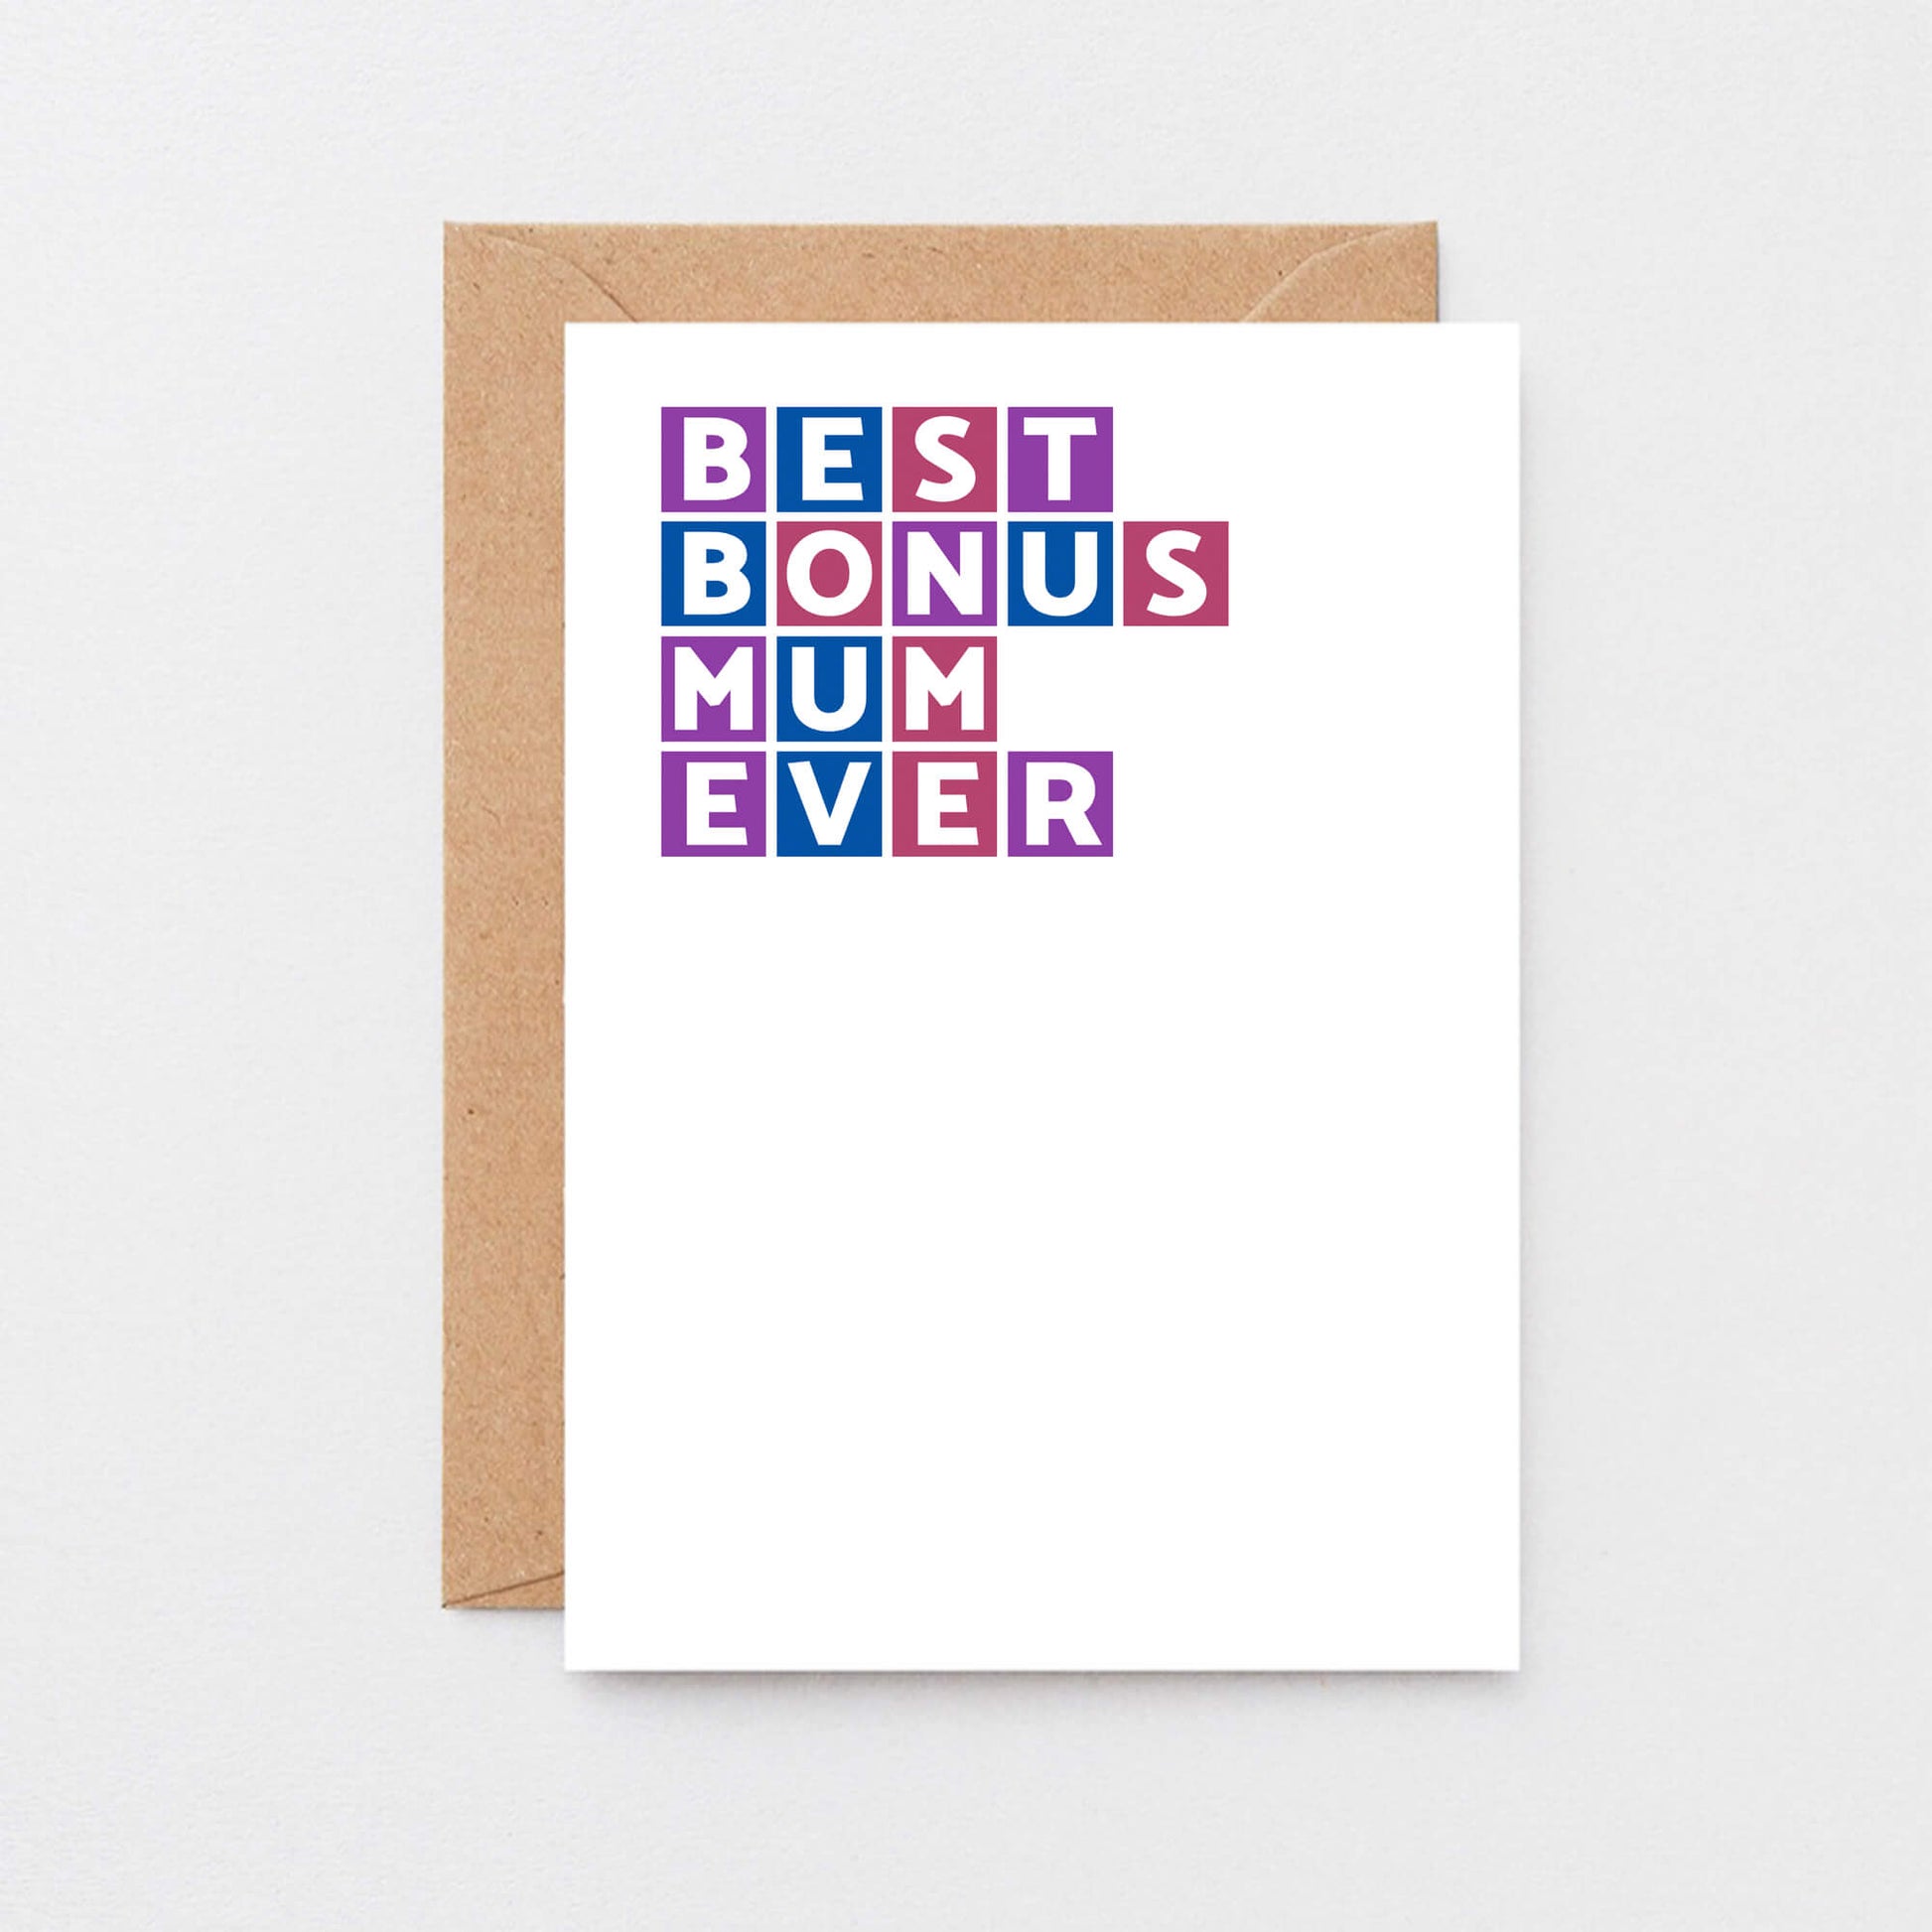 Best Bonus Mum Ever Card by SixElevenCreations. Product Code SE0328A6